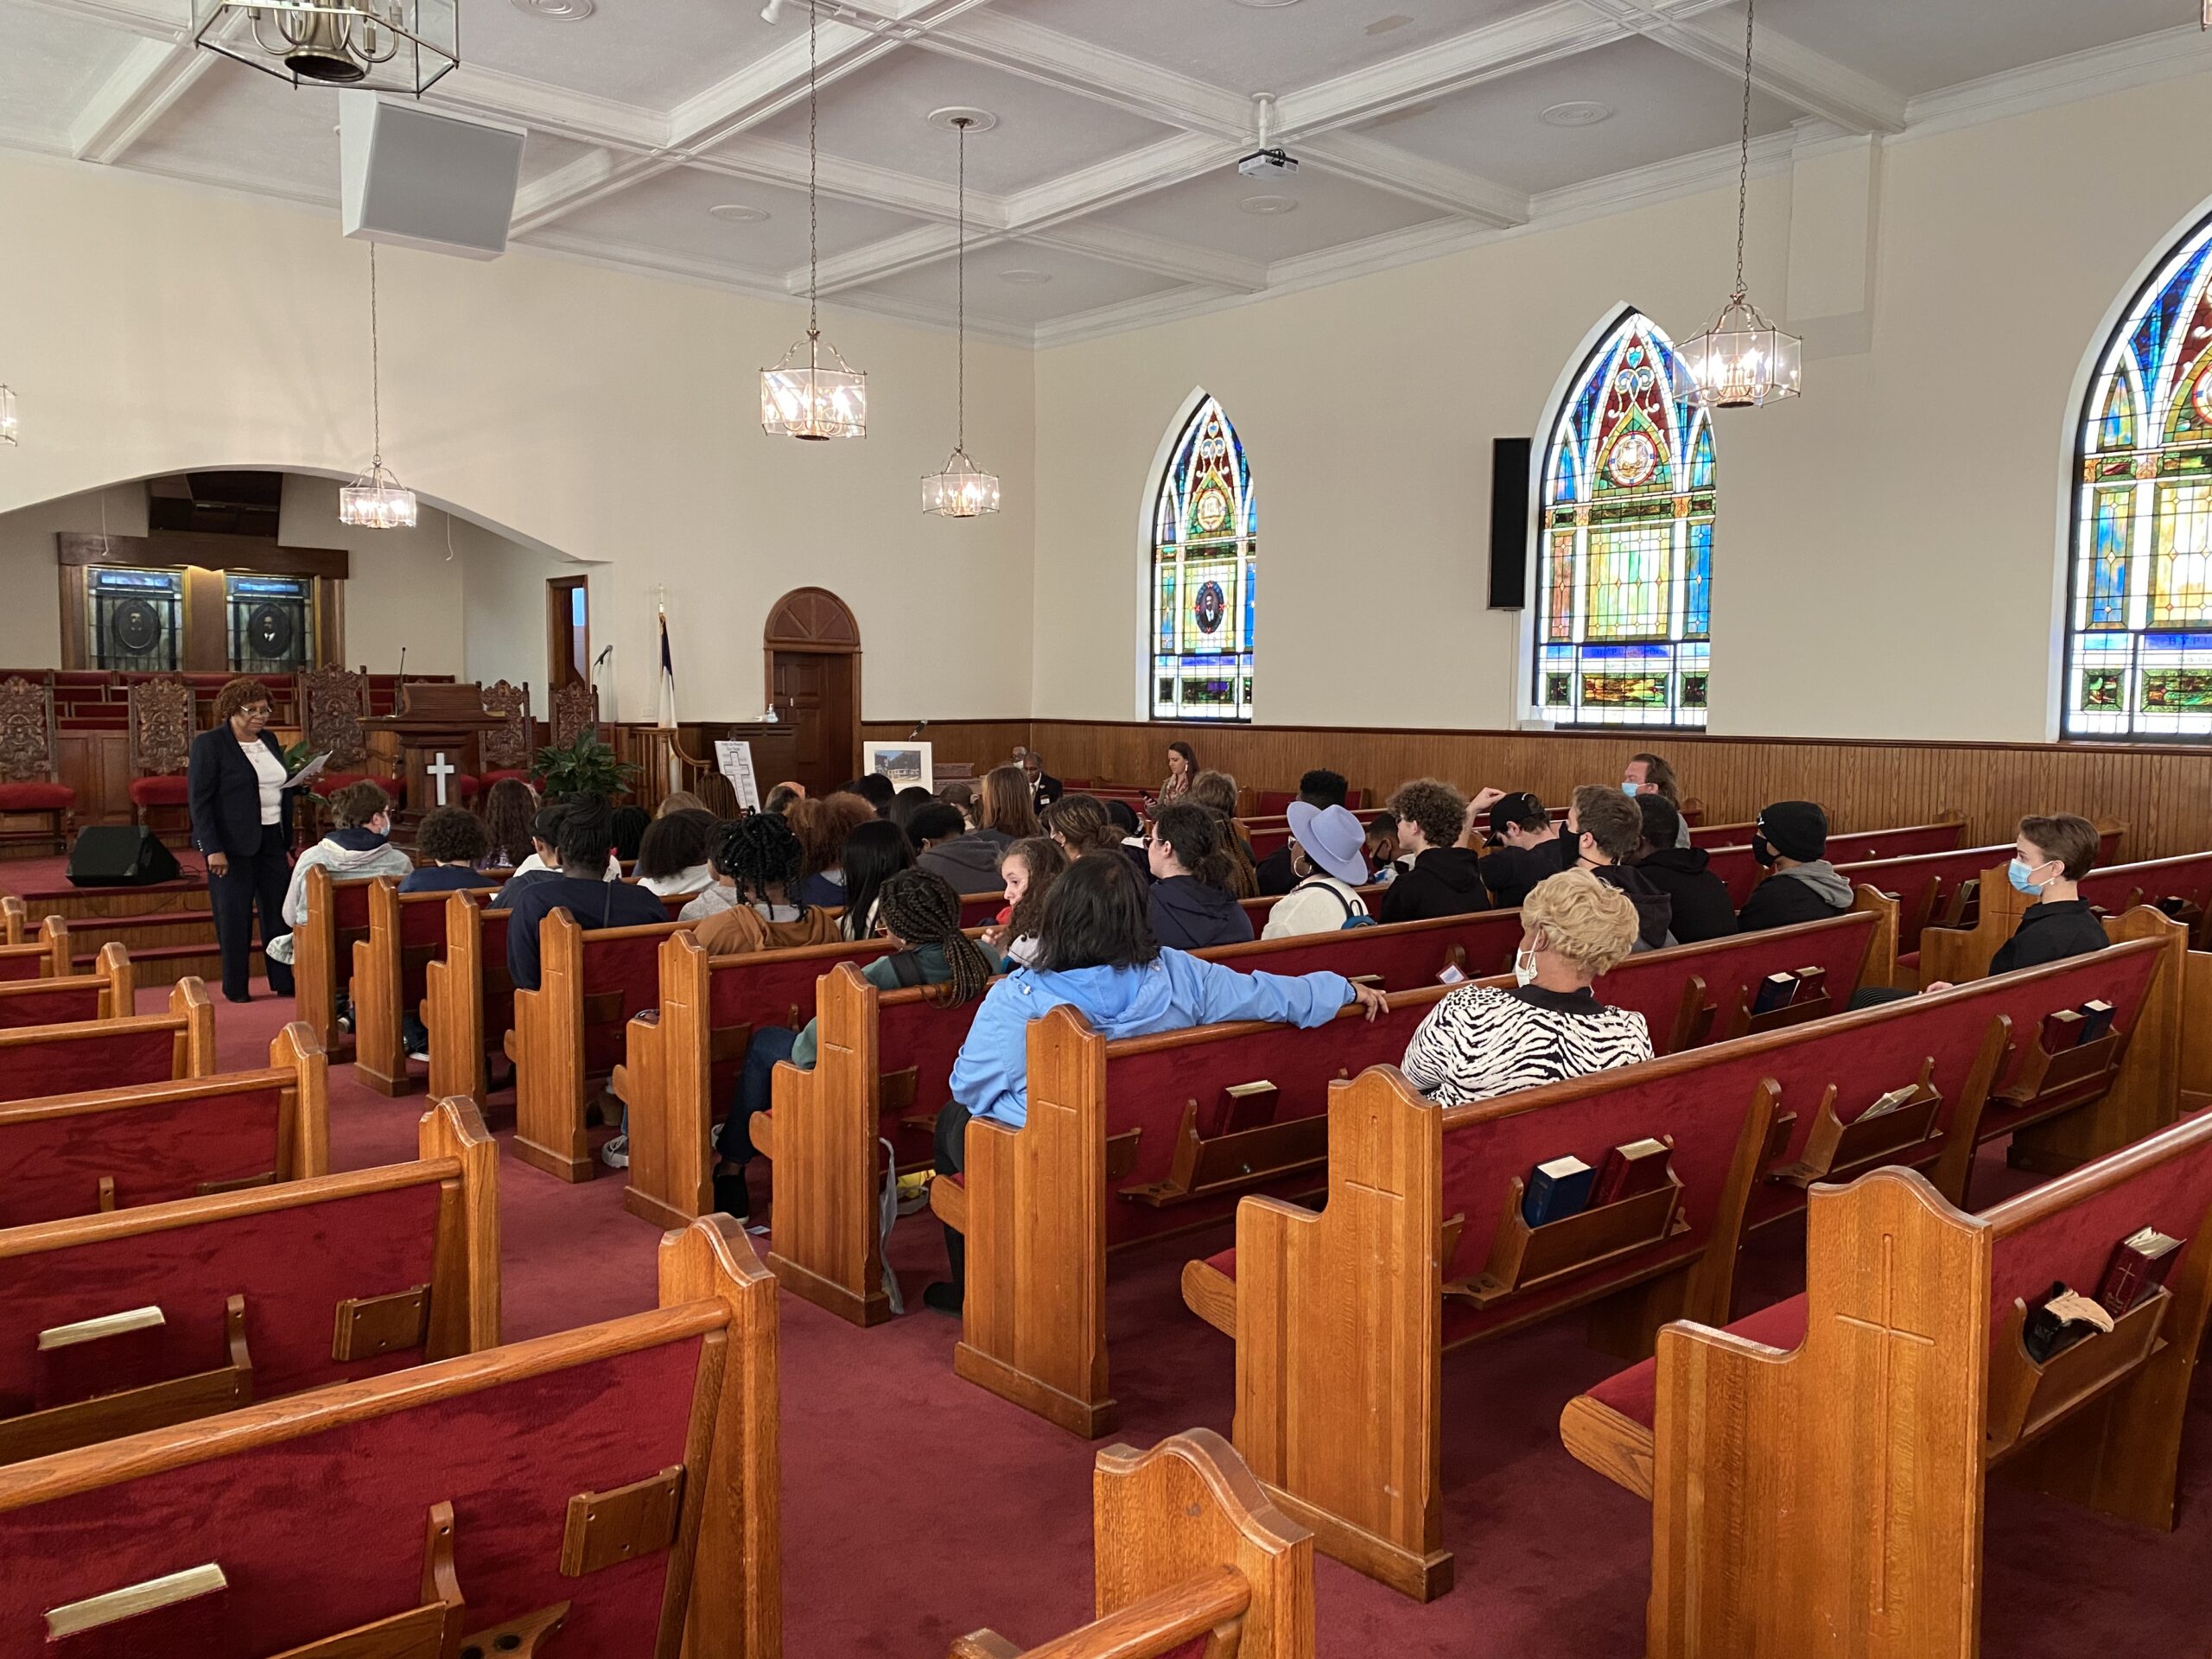 People sitting in the pews inside First African Baptist Church where the Oratorical Speech Contest takes place.